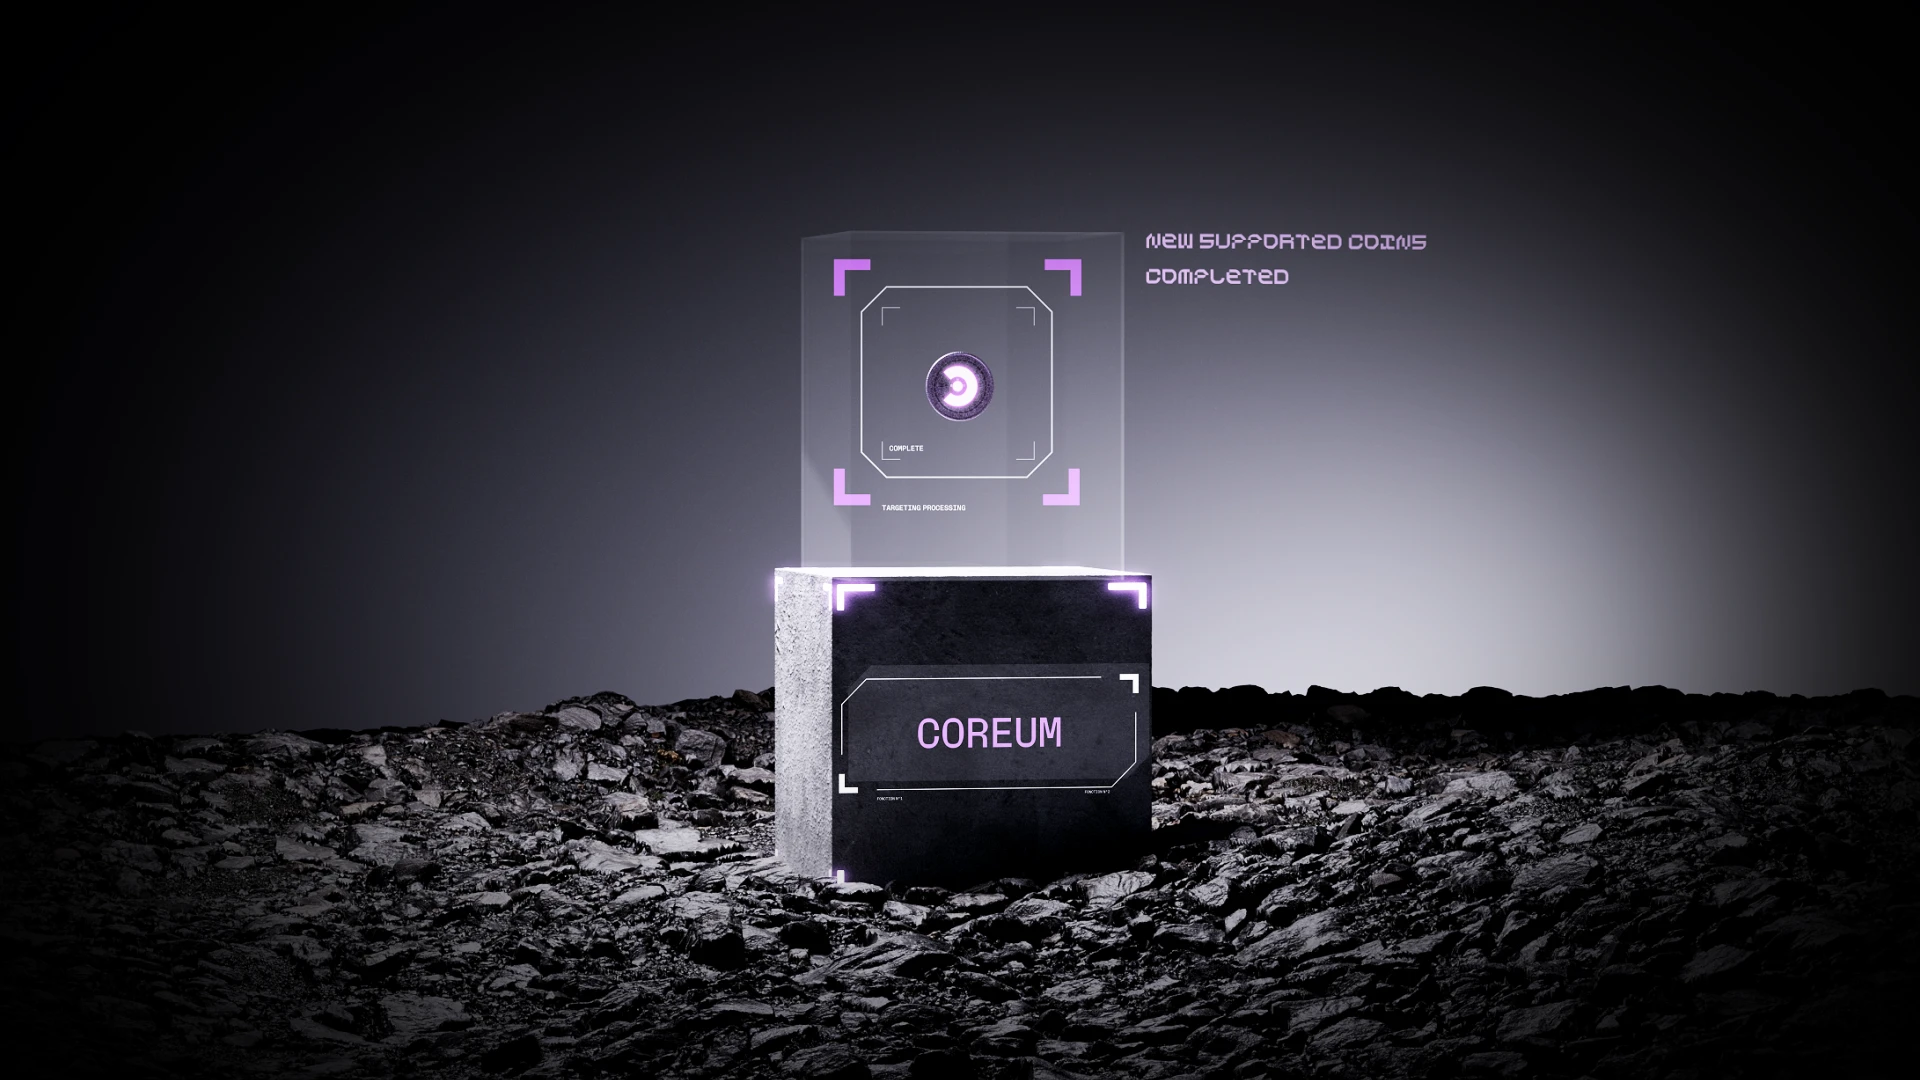 Coreum (COREUM) Joins Ledger Live! Send, Receive & Stake Your Cosmos-Based Tokens